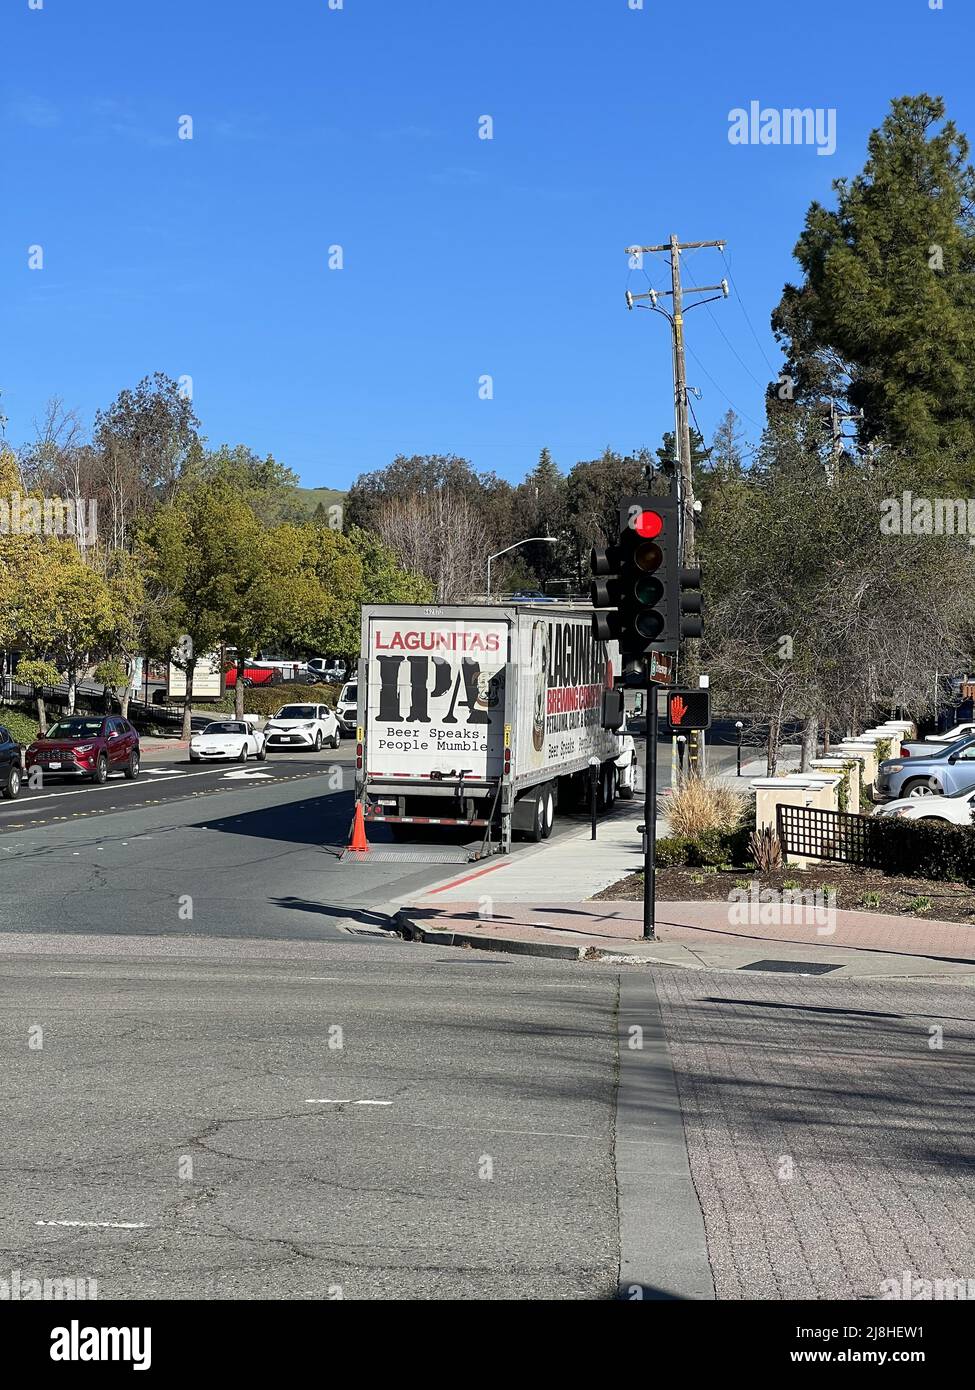 Truck delivering beverages from the craft brewery Lagunitas, Lafayette, California, March, 2022. Photo courtesy Sftm. Stock Photo